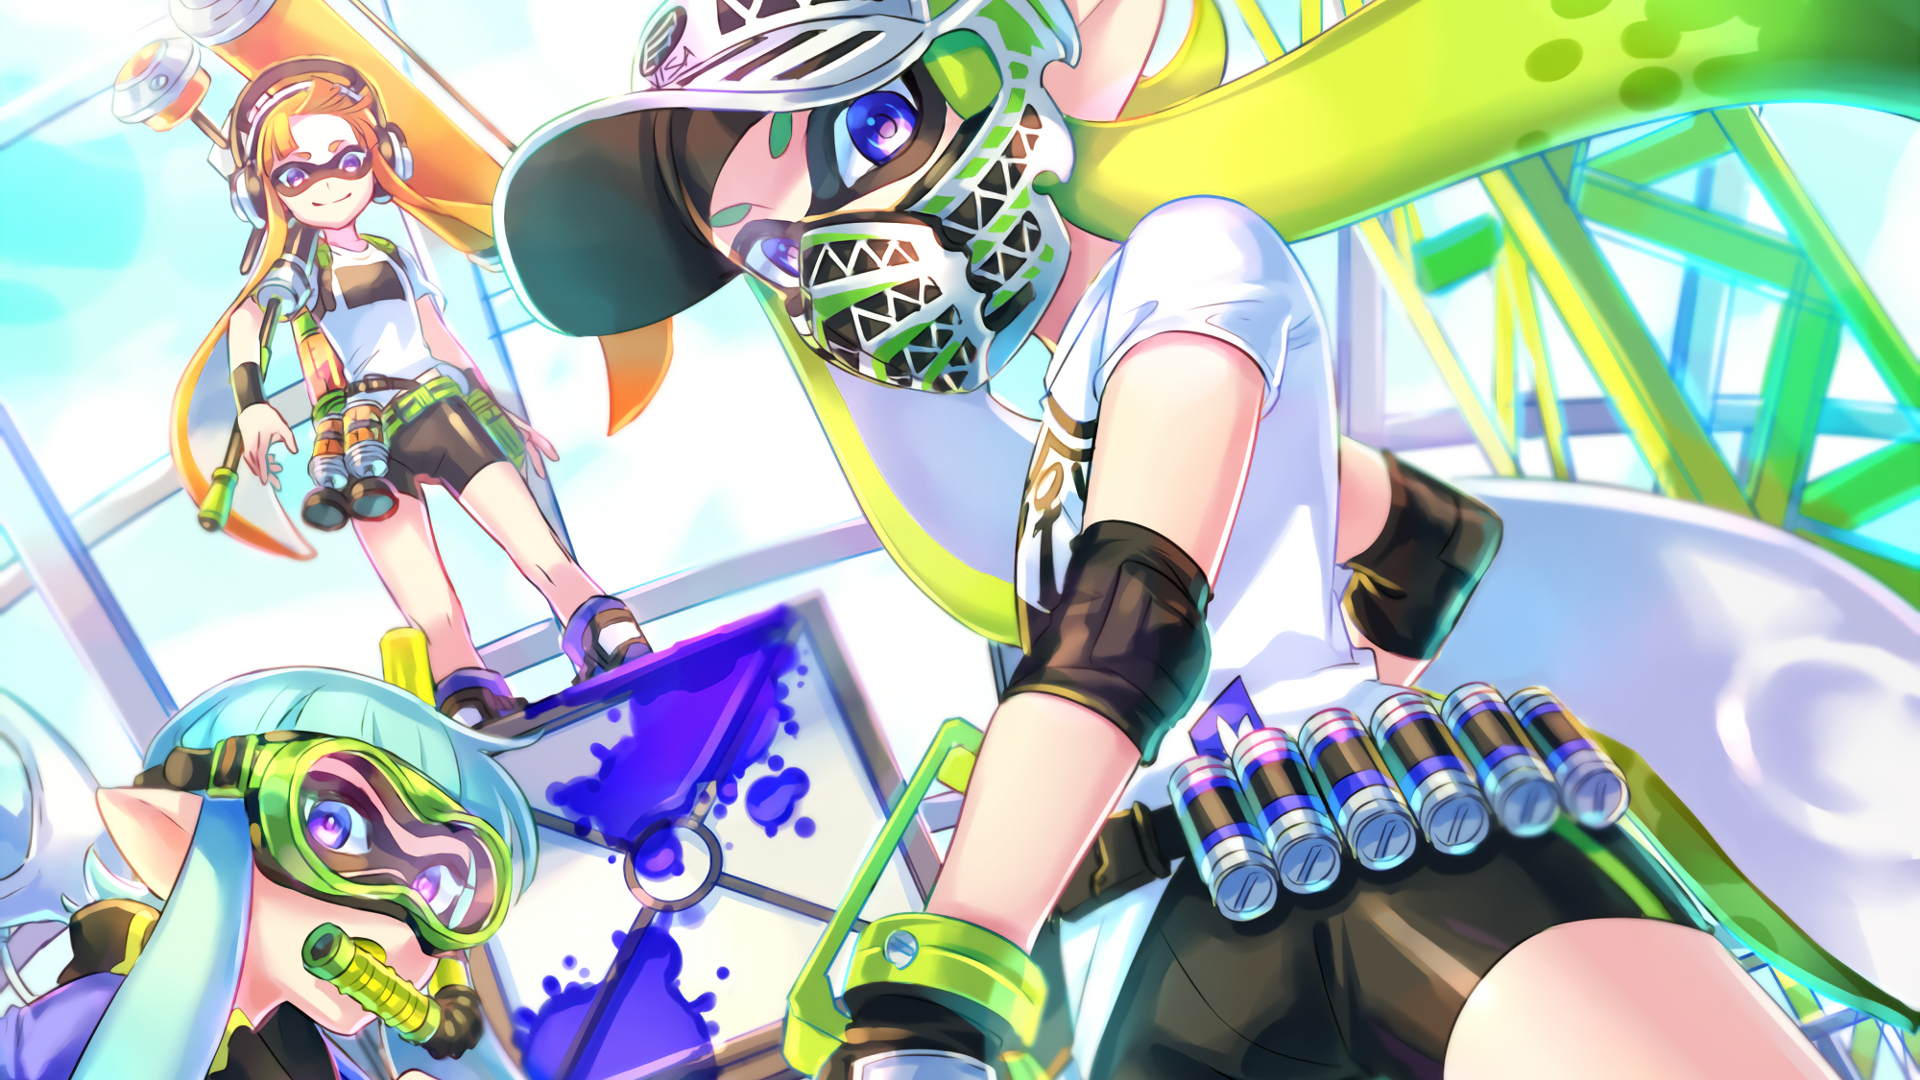 1920x1080 70+ Splatoon HD Wallpapers and Backgrounds